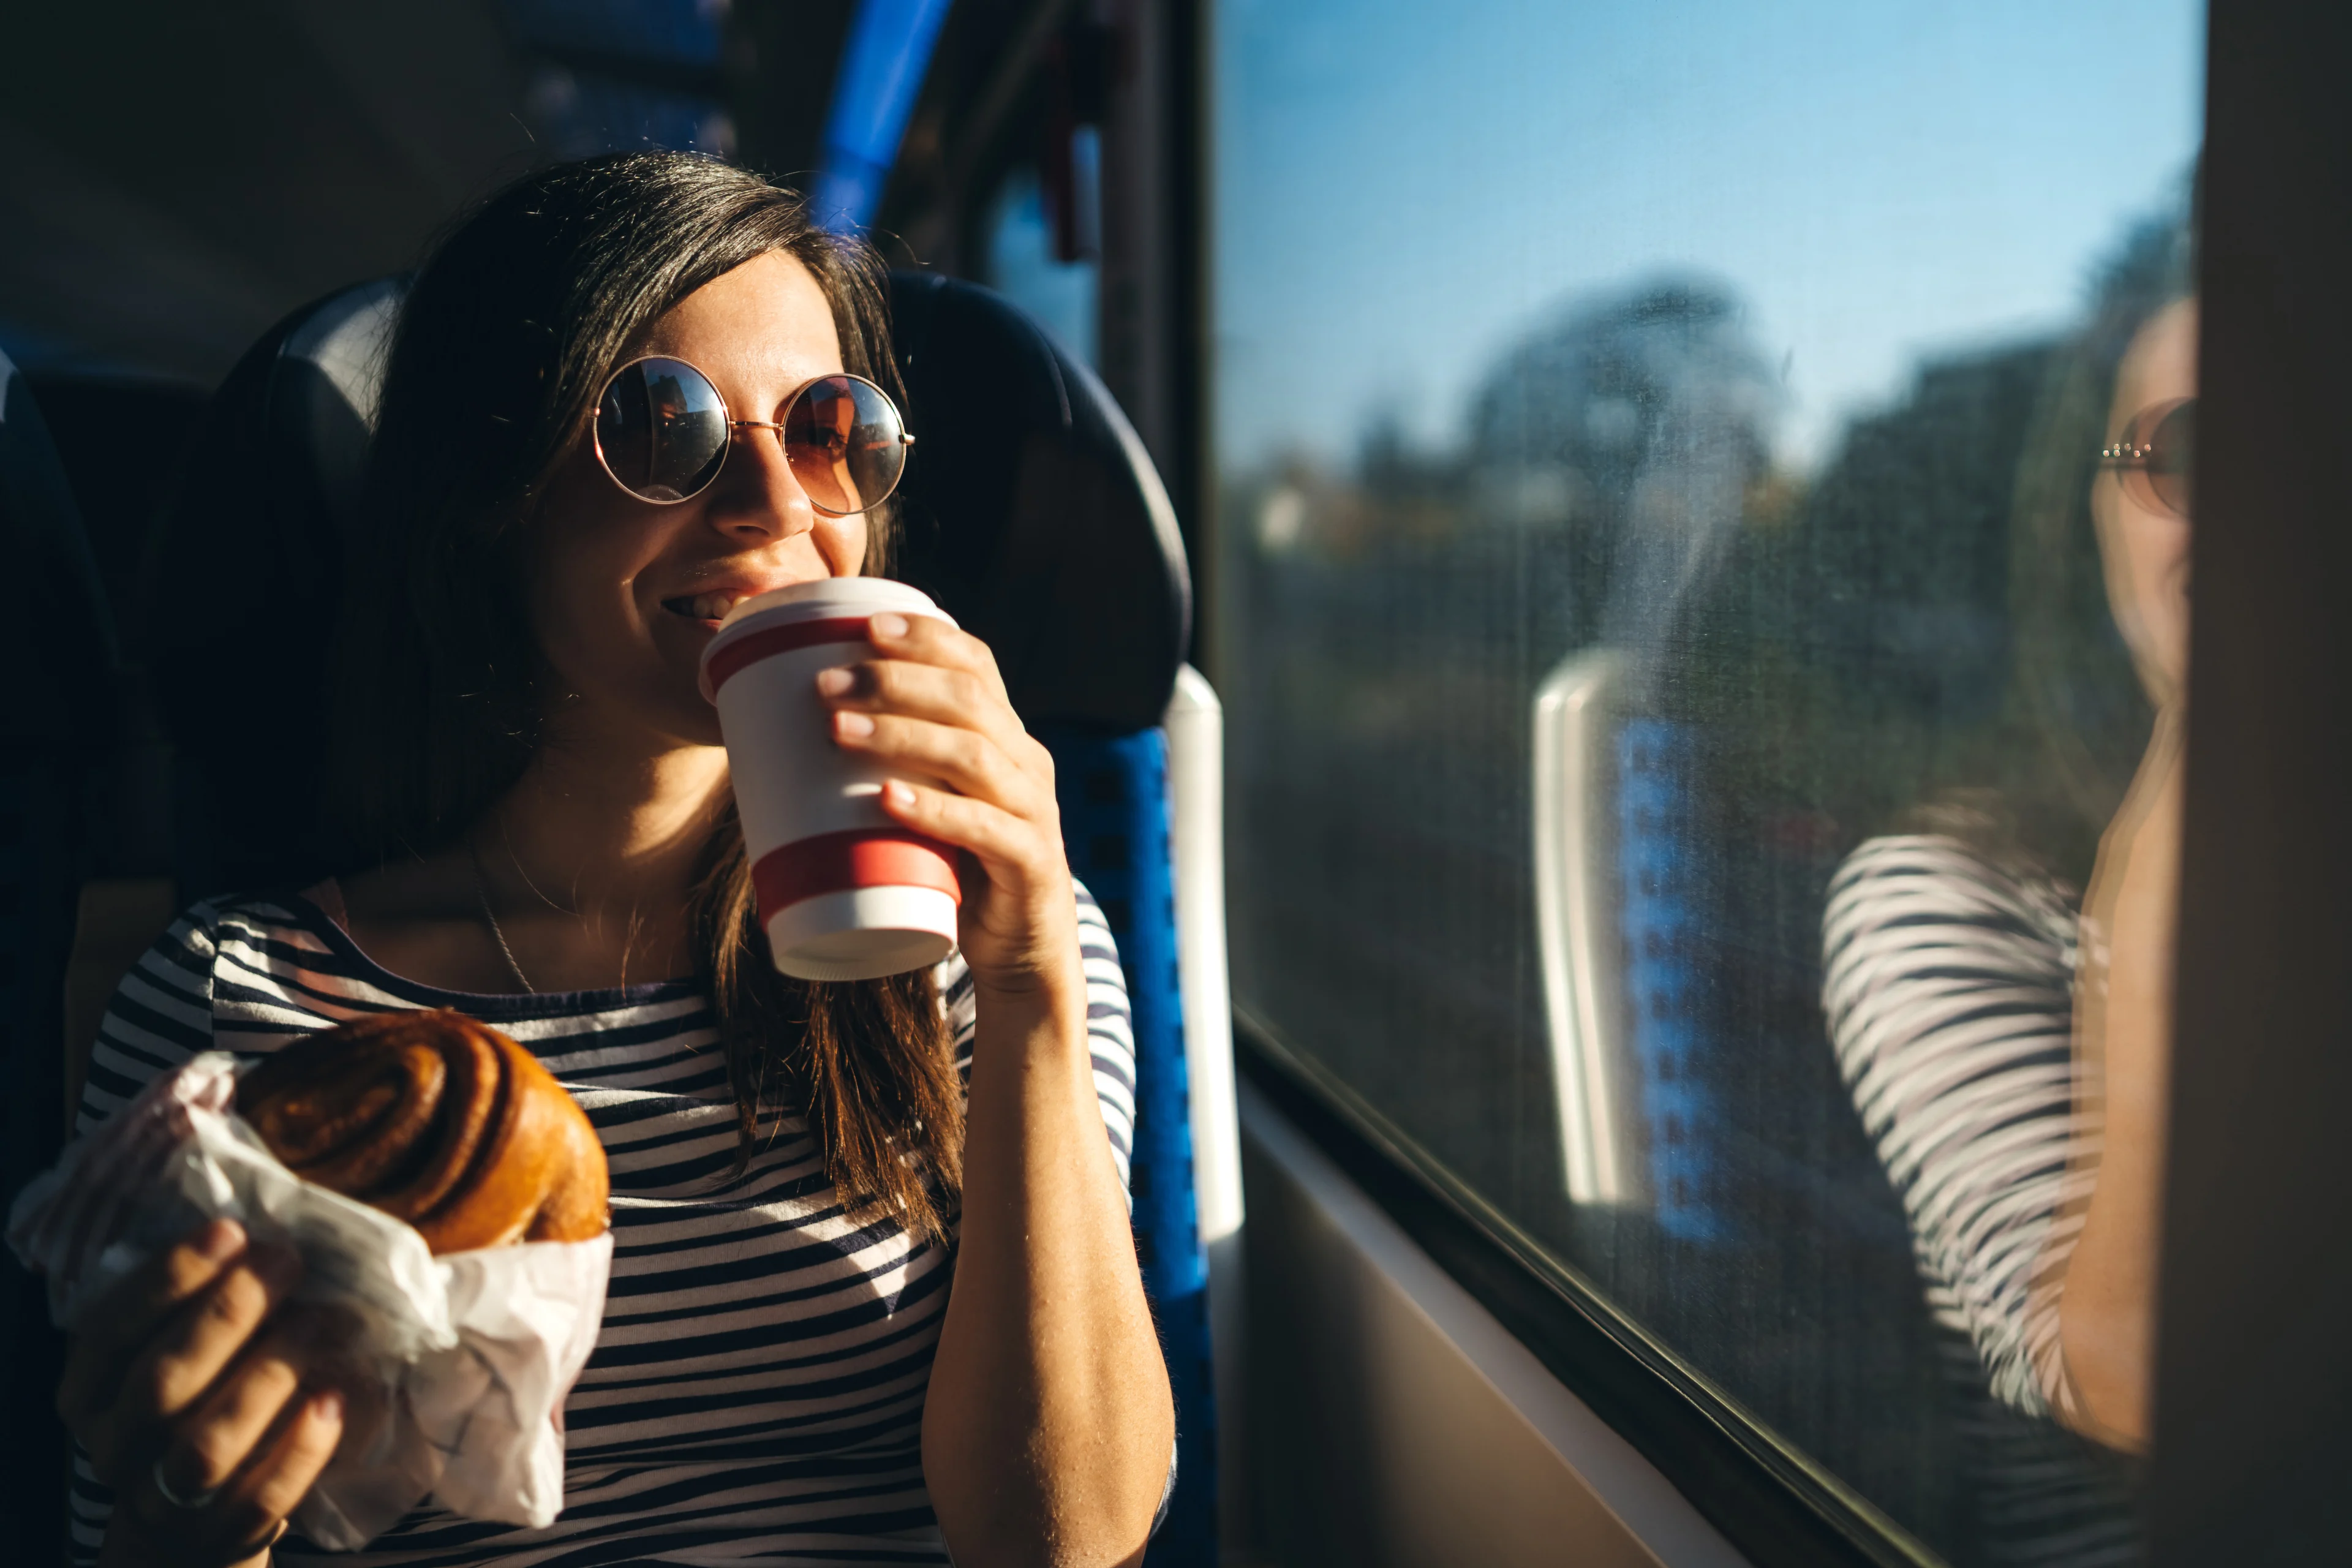 A happy young woman wearing sunglasses holds a large pastry and drinks a hot drink while looking out of a train window